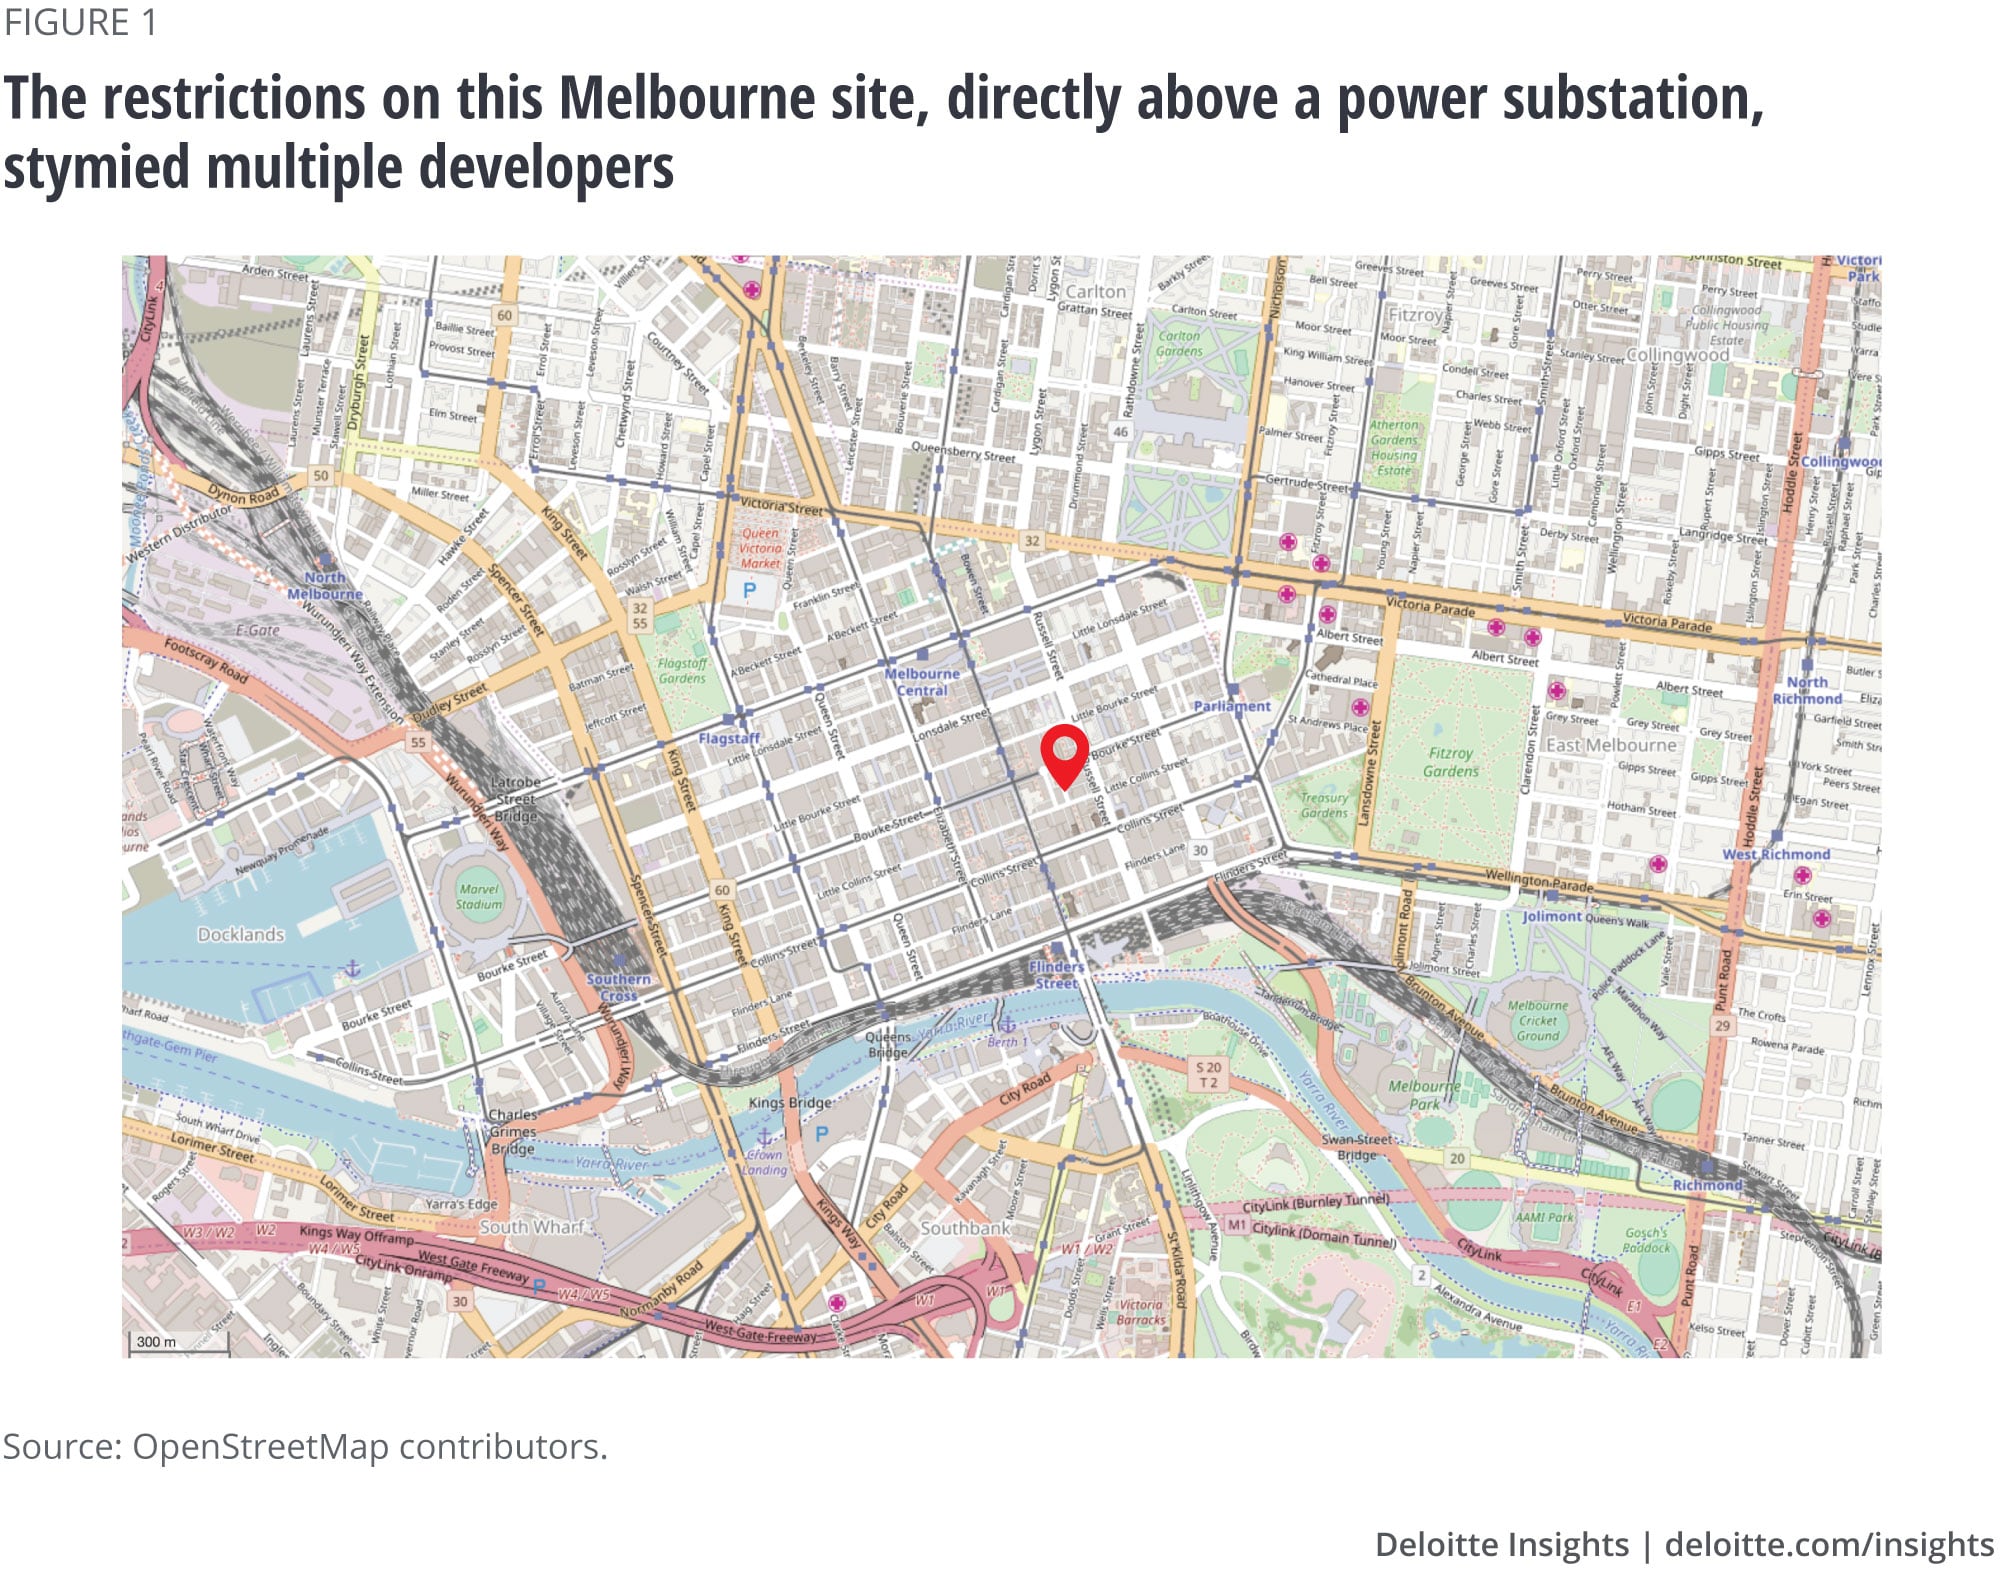 The restrictions on this Melbourne site, directly above a power substation, stymied multiple developers